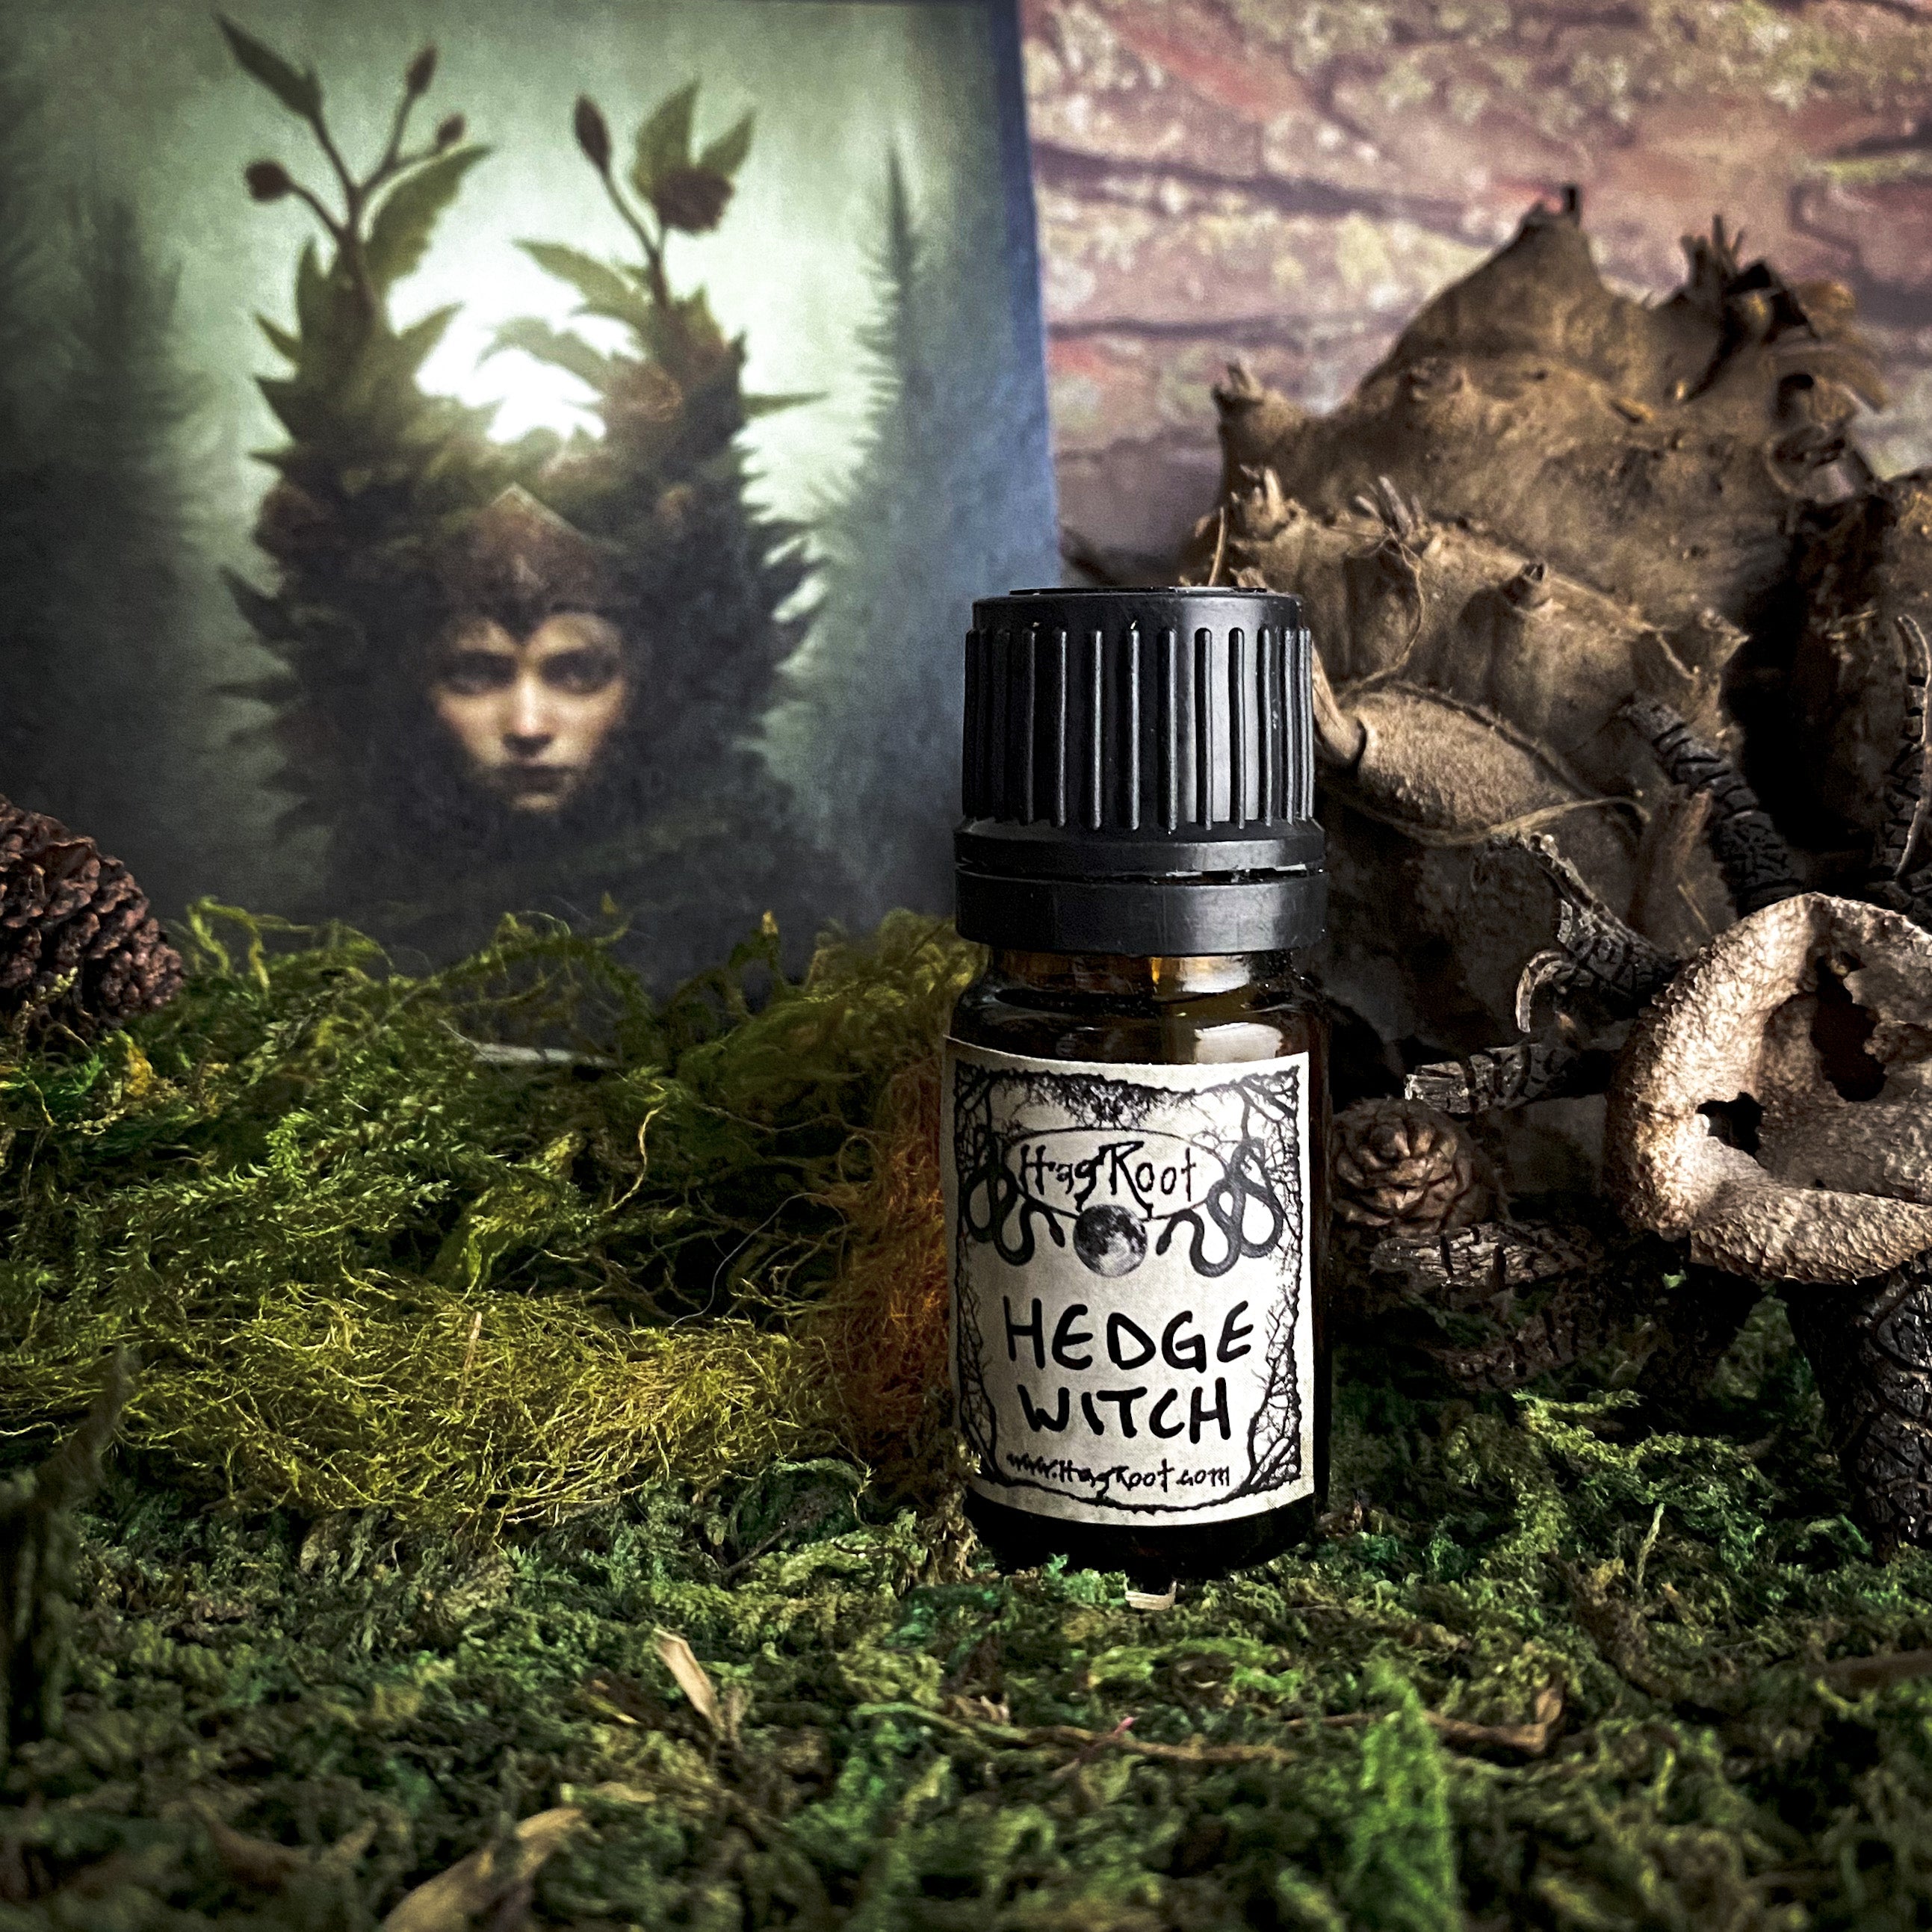 HEDGE WITCH-(Wild Growing Gardens, Abundant Green Hedges, Sweet Grass)-Perfume, Cologne, Anointing, Ritual Oil